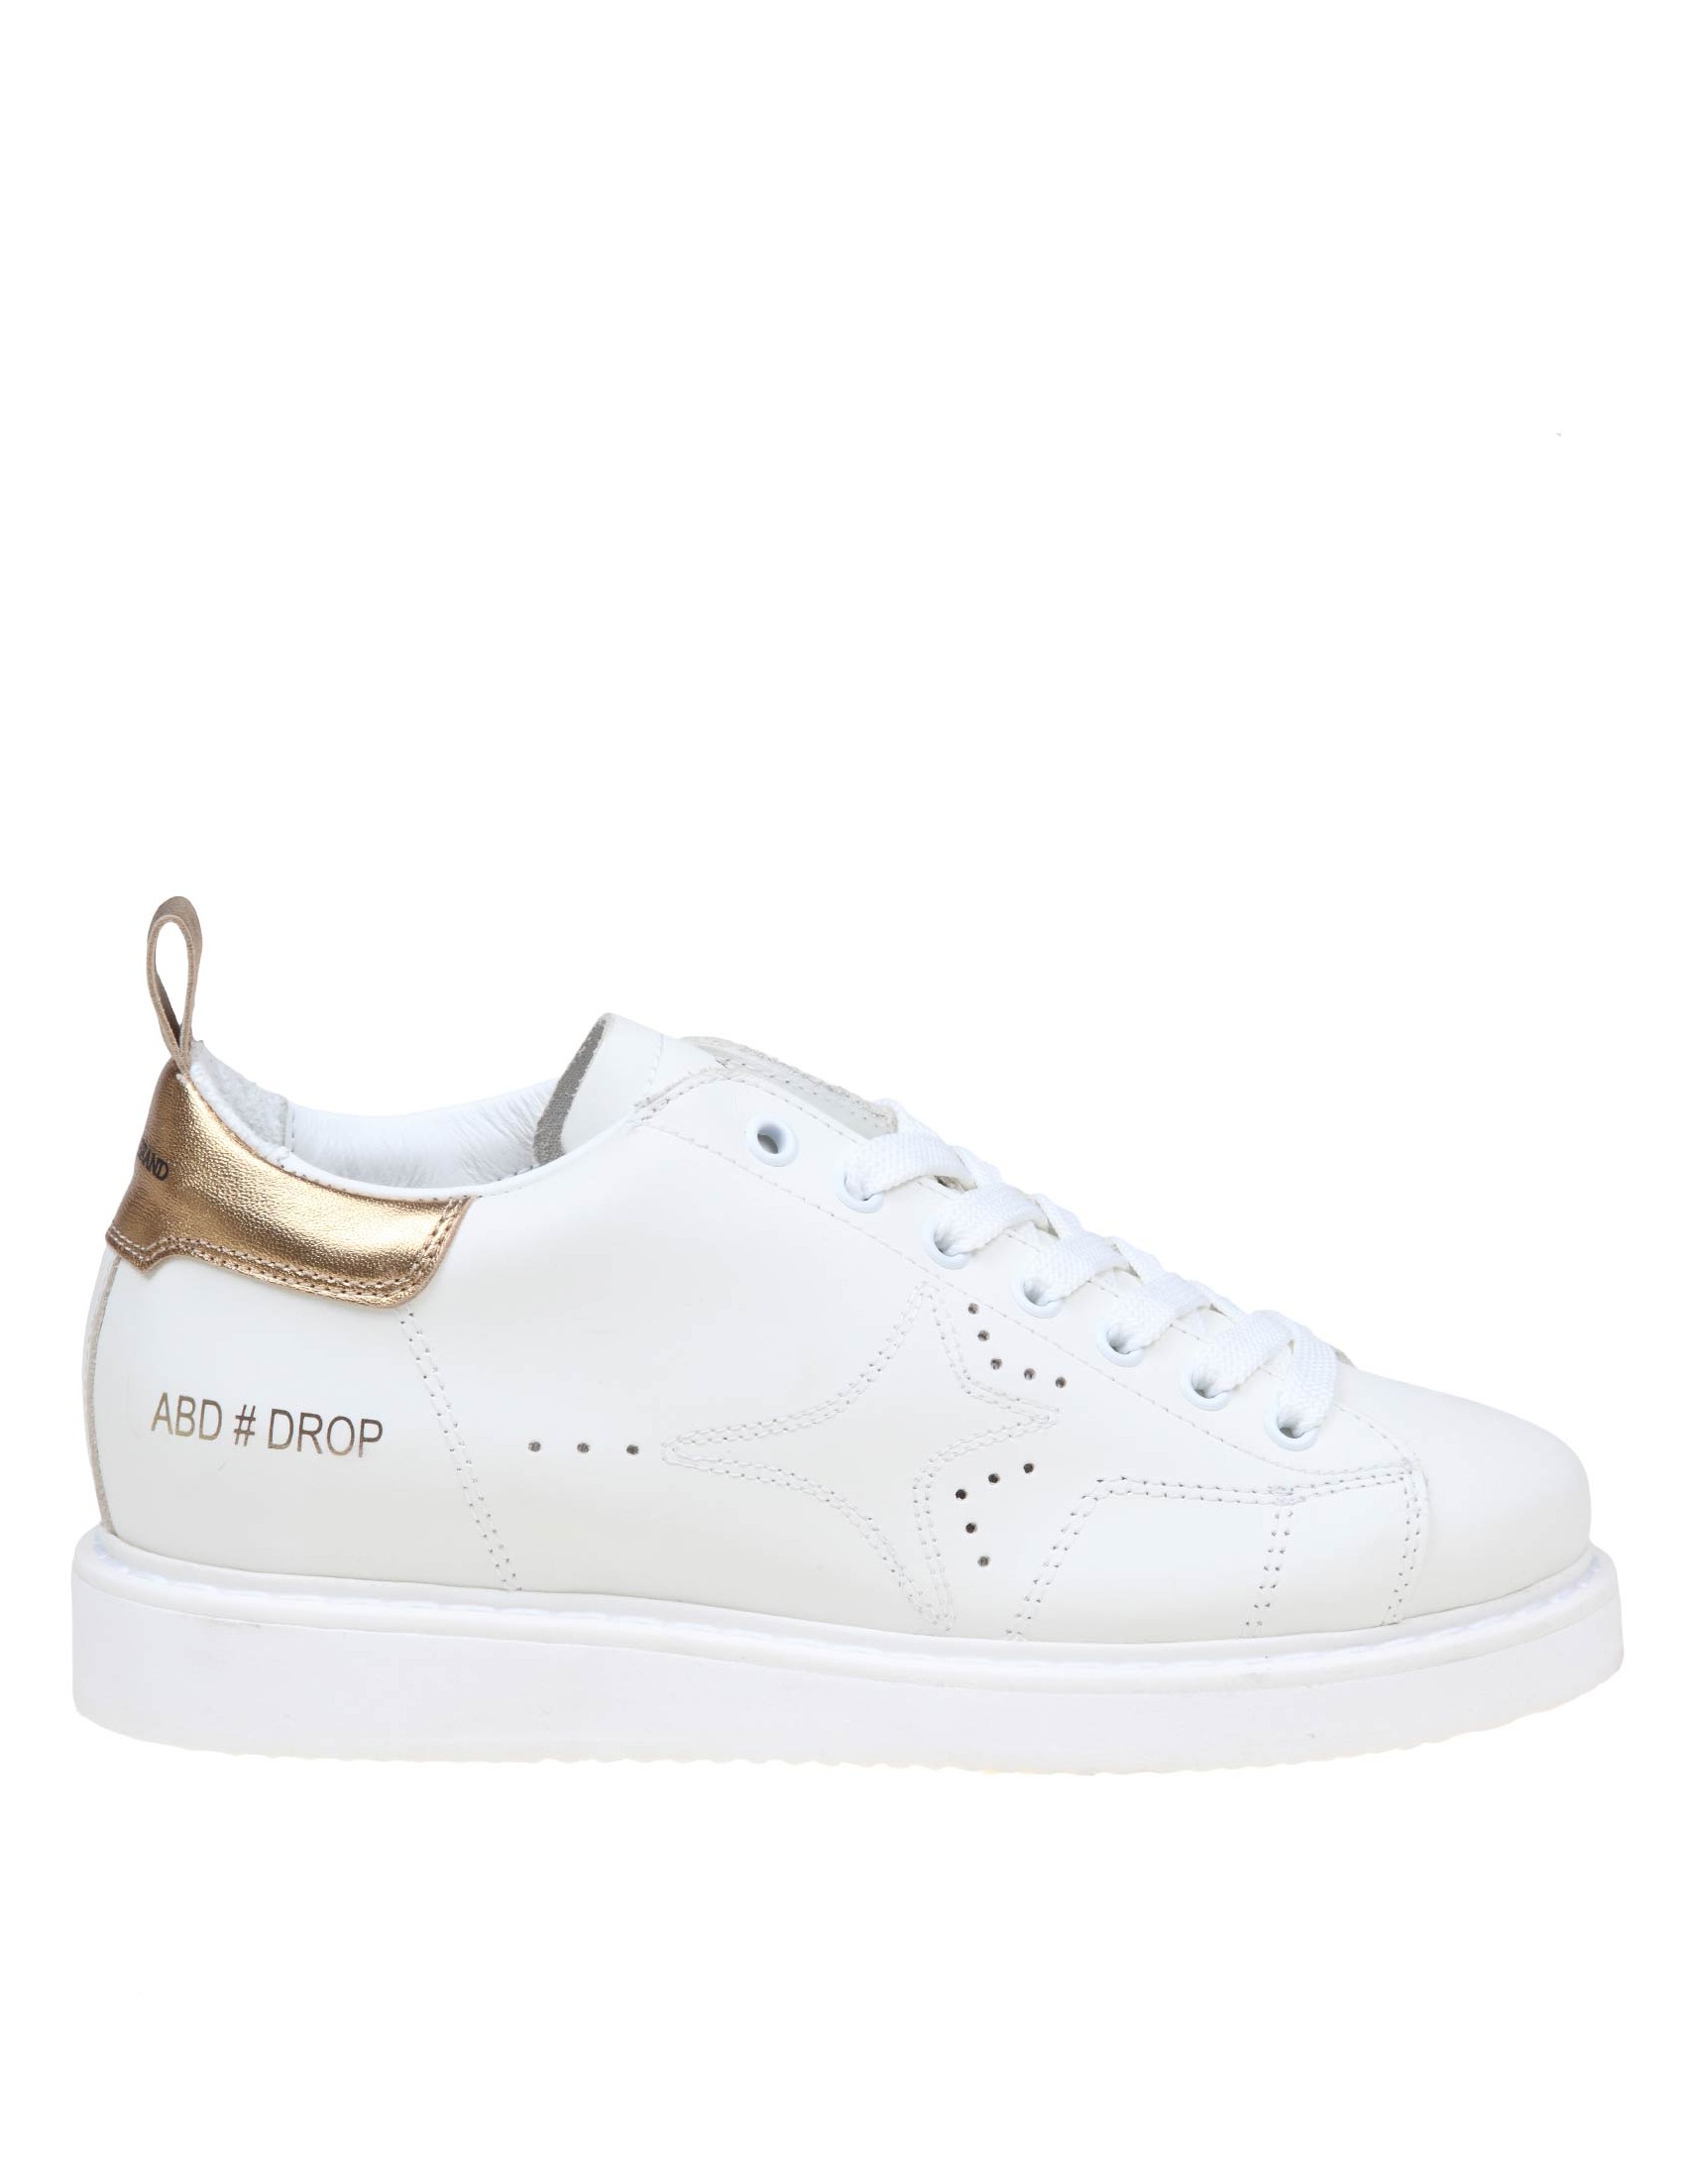 AMA BRAND WHITE AND GOLD LEATHER SNEAKERS